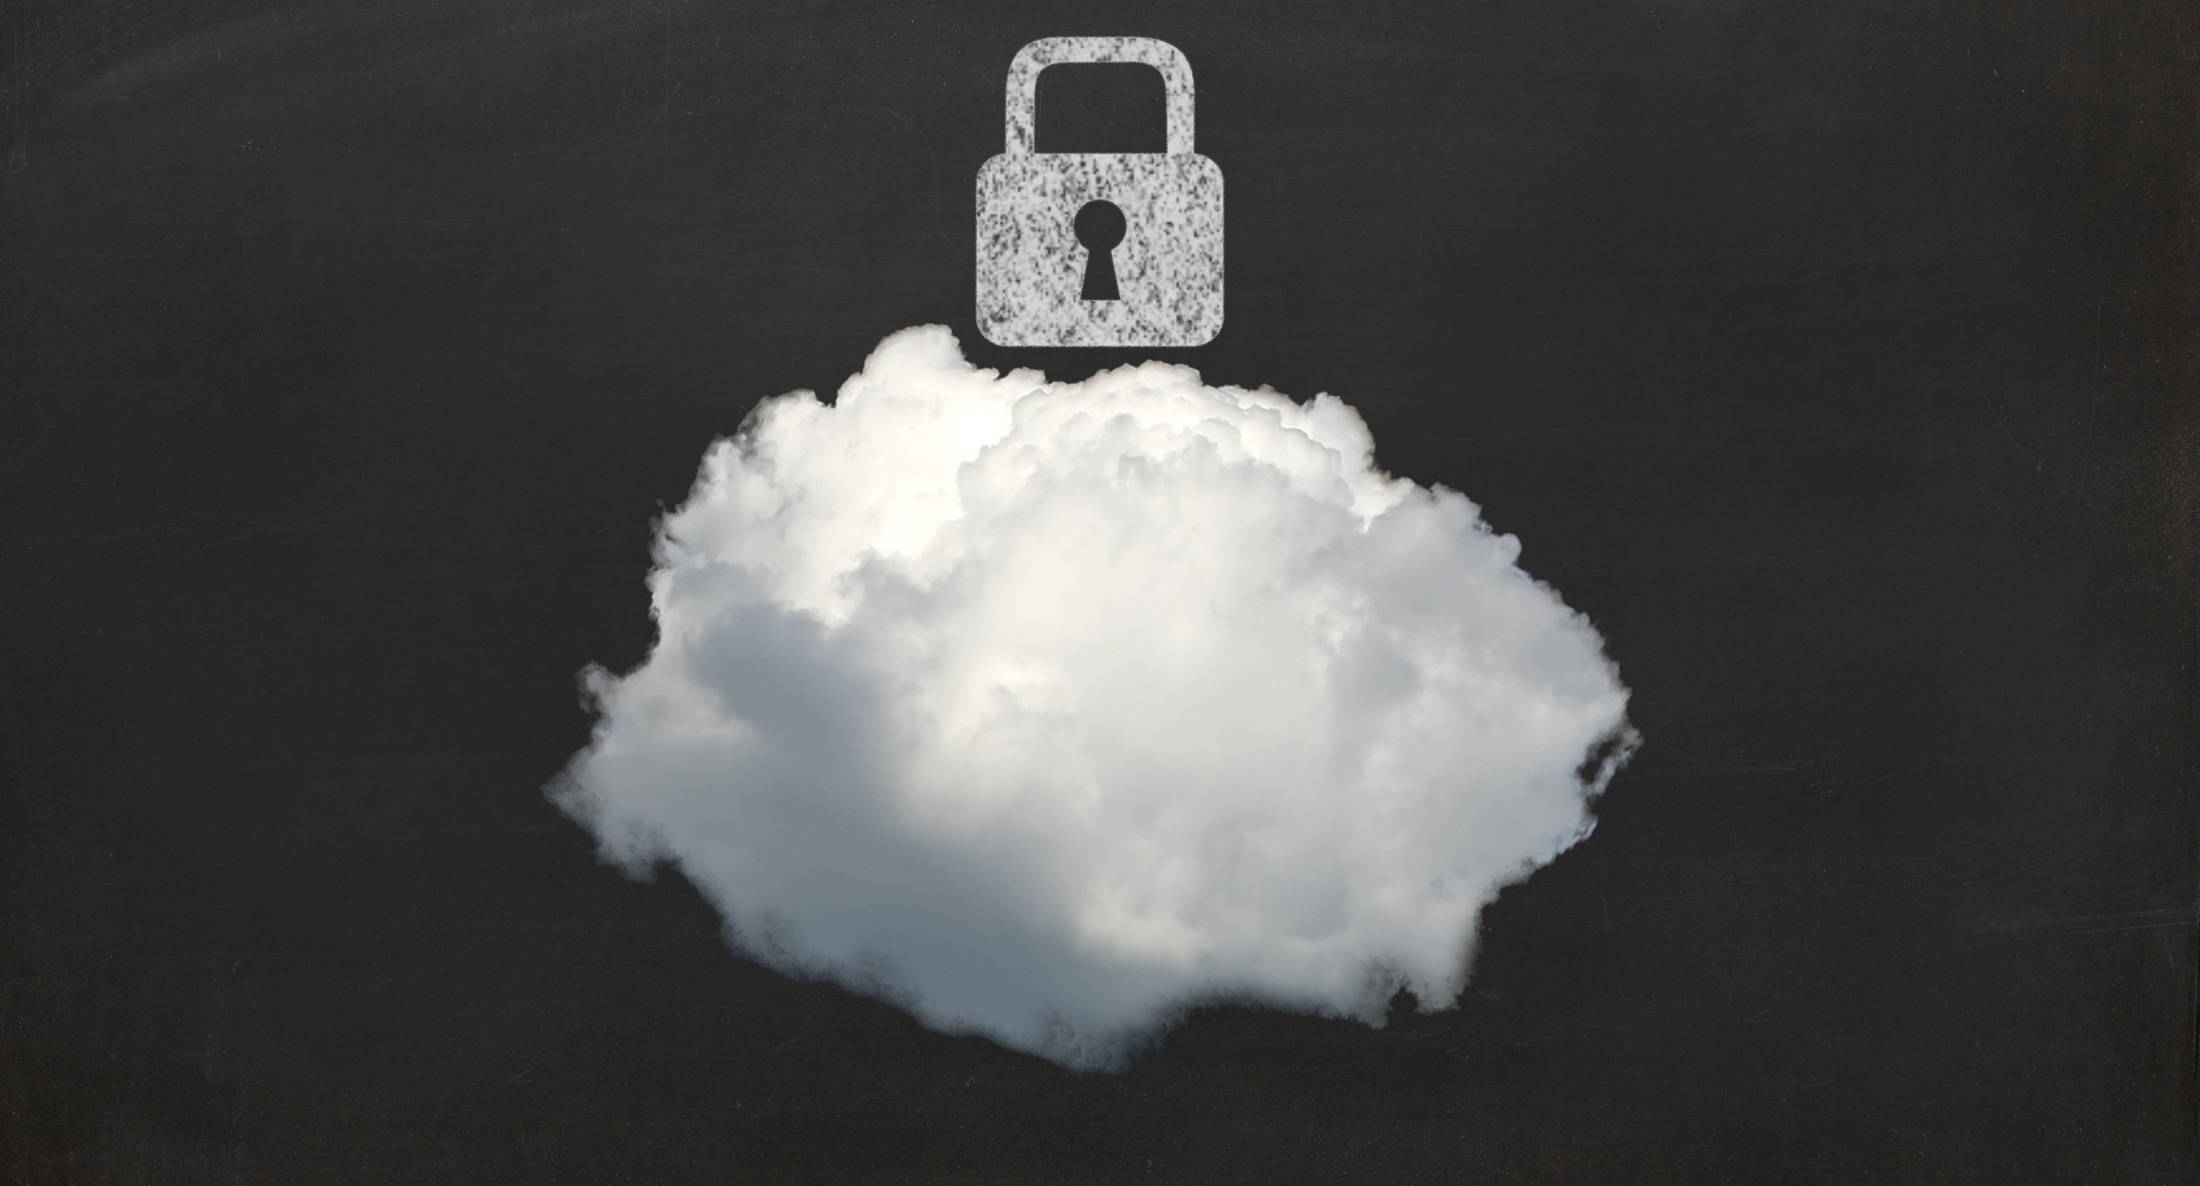 Cloud Security issues aren’t unknown